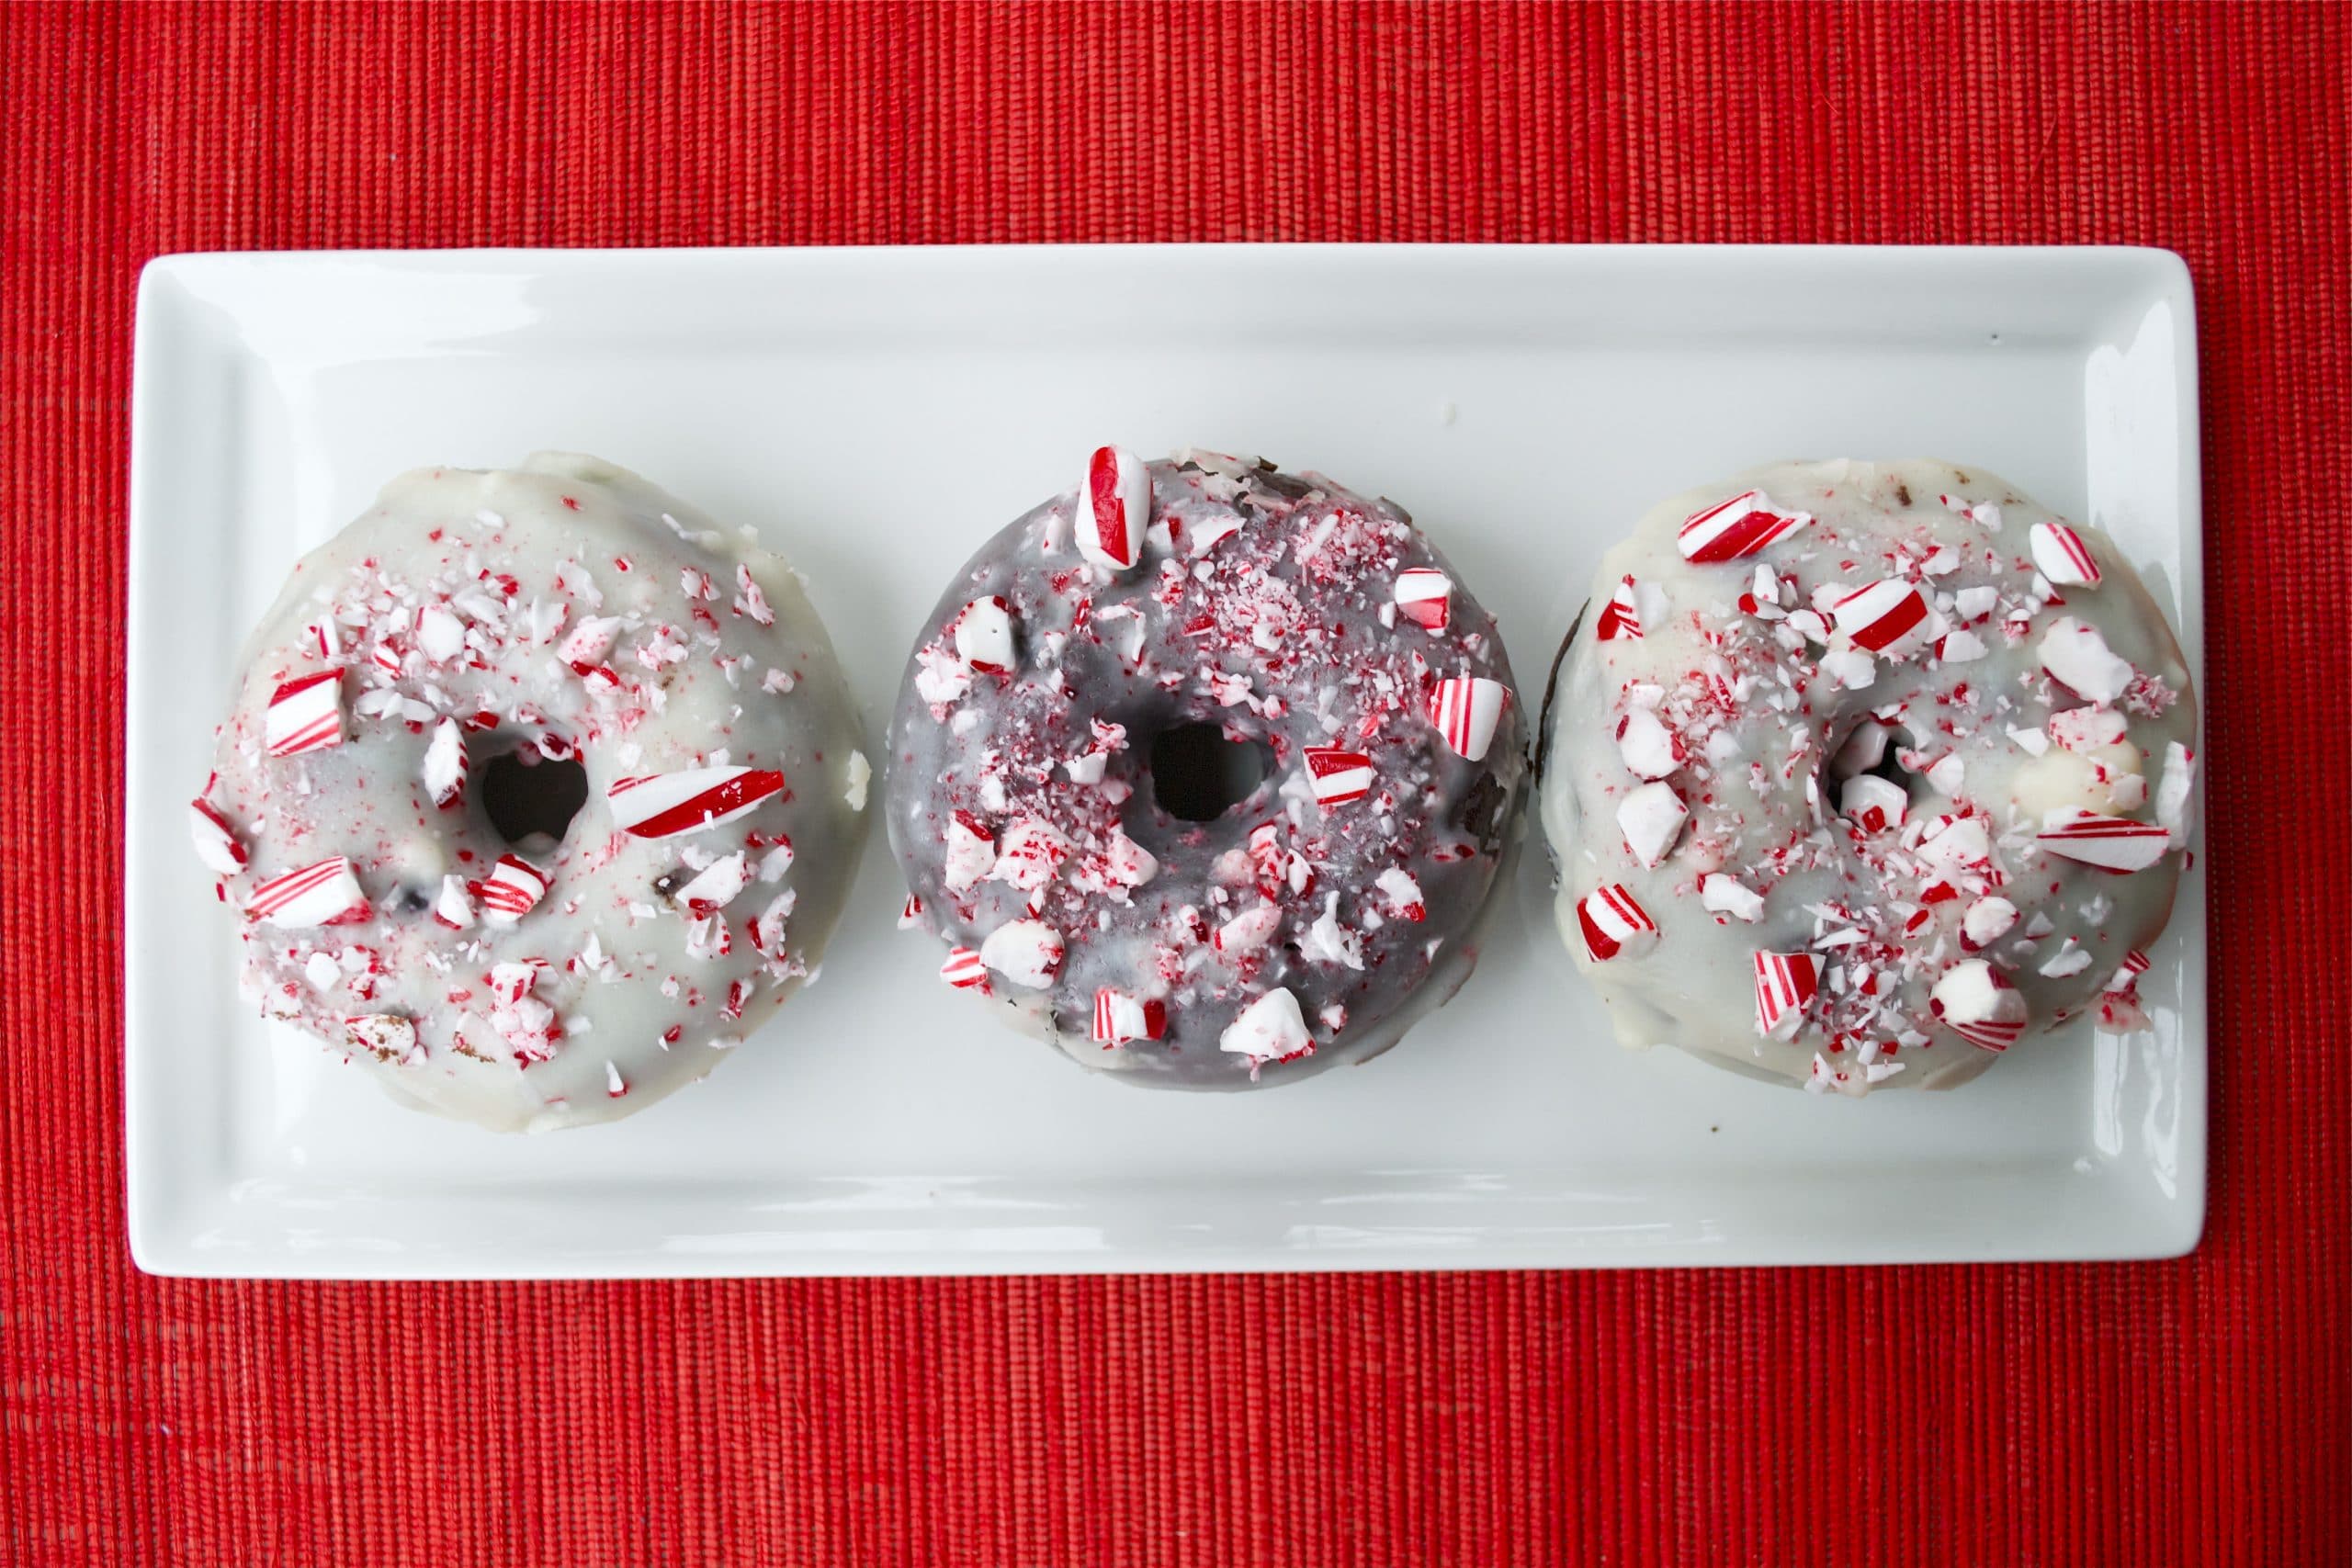 A platter with three Gluten-Free Chocolate Peppermint Donuts topped with crushed candy canes.